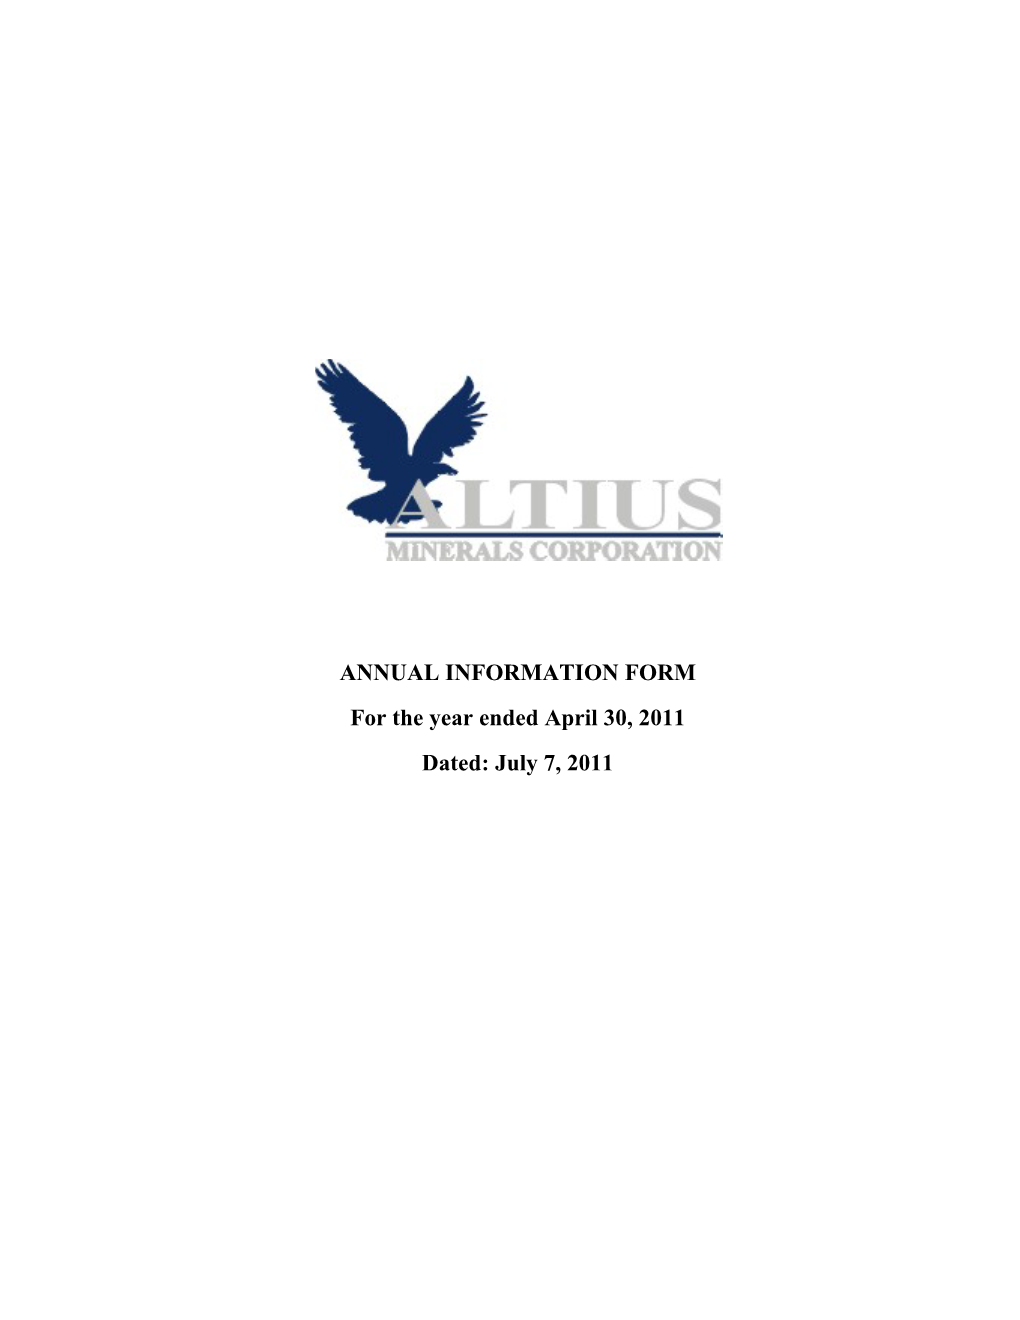 ANNUAL INFORMATION FORM for the Year Ended April 30, 2011 Dated: July 7, 2011 TABLE of CONTENTS